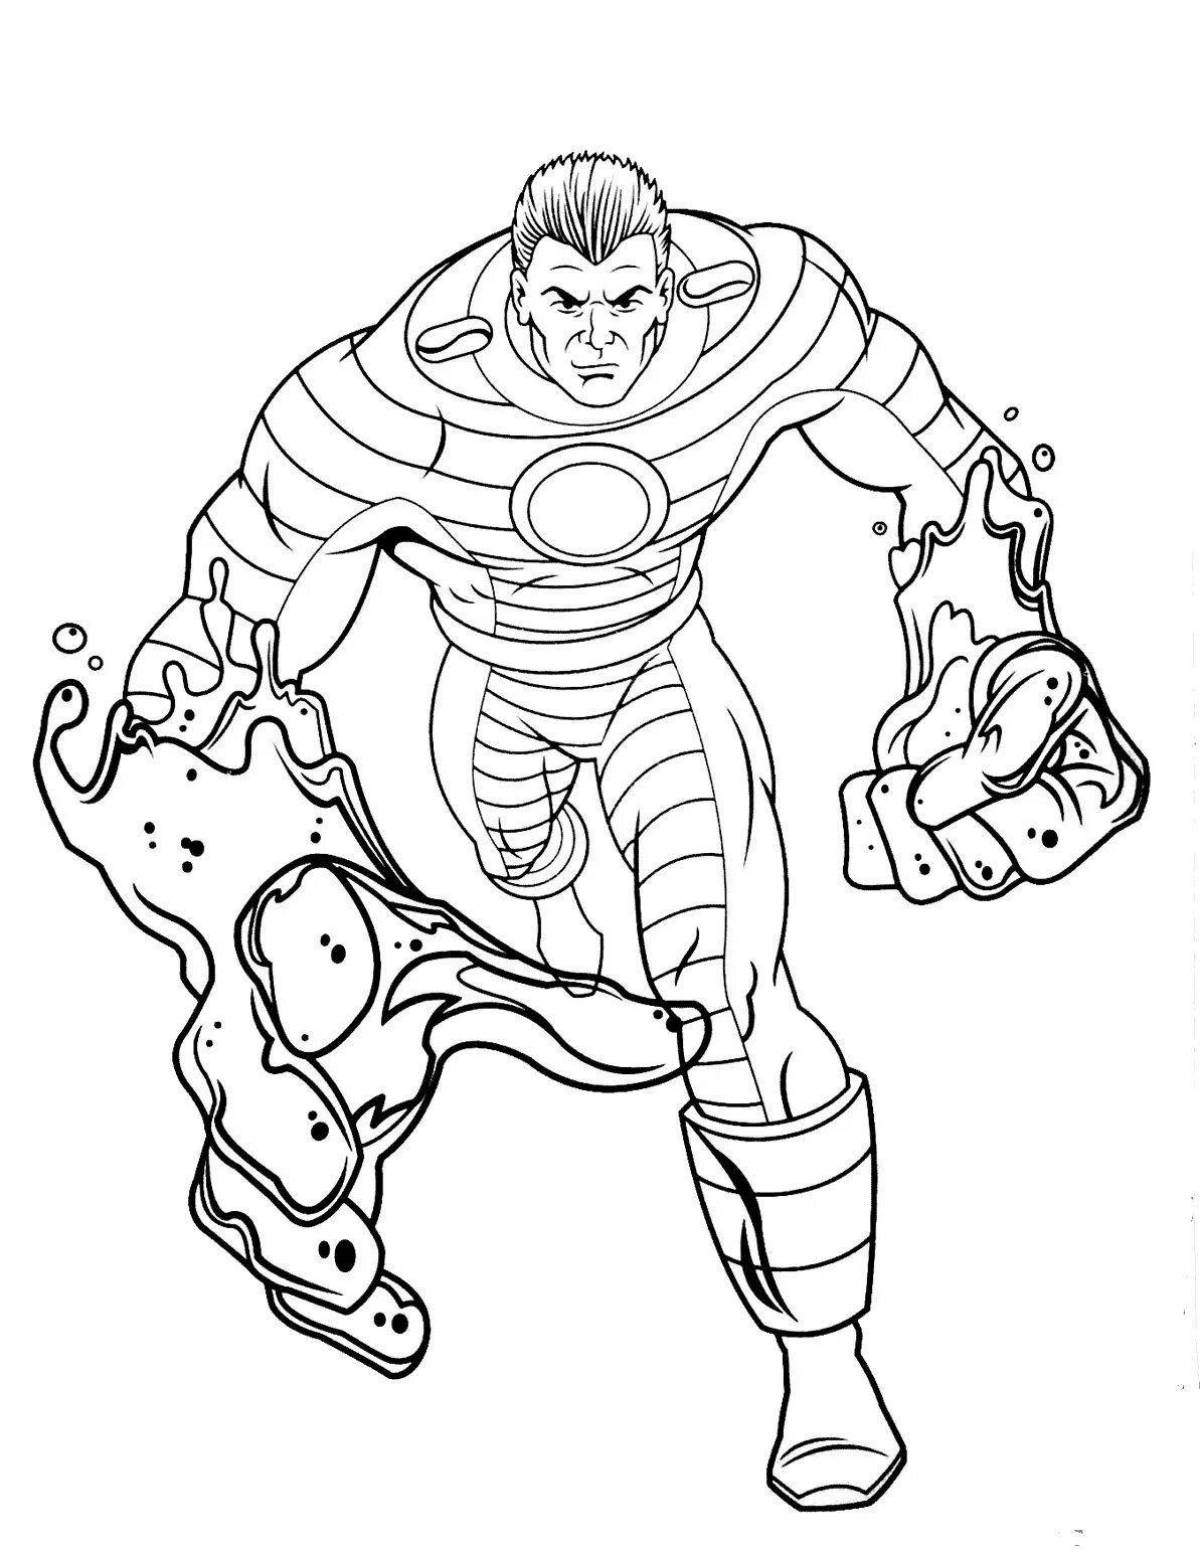 Exciting marvel villains coloring book